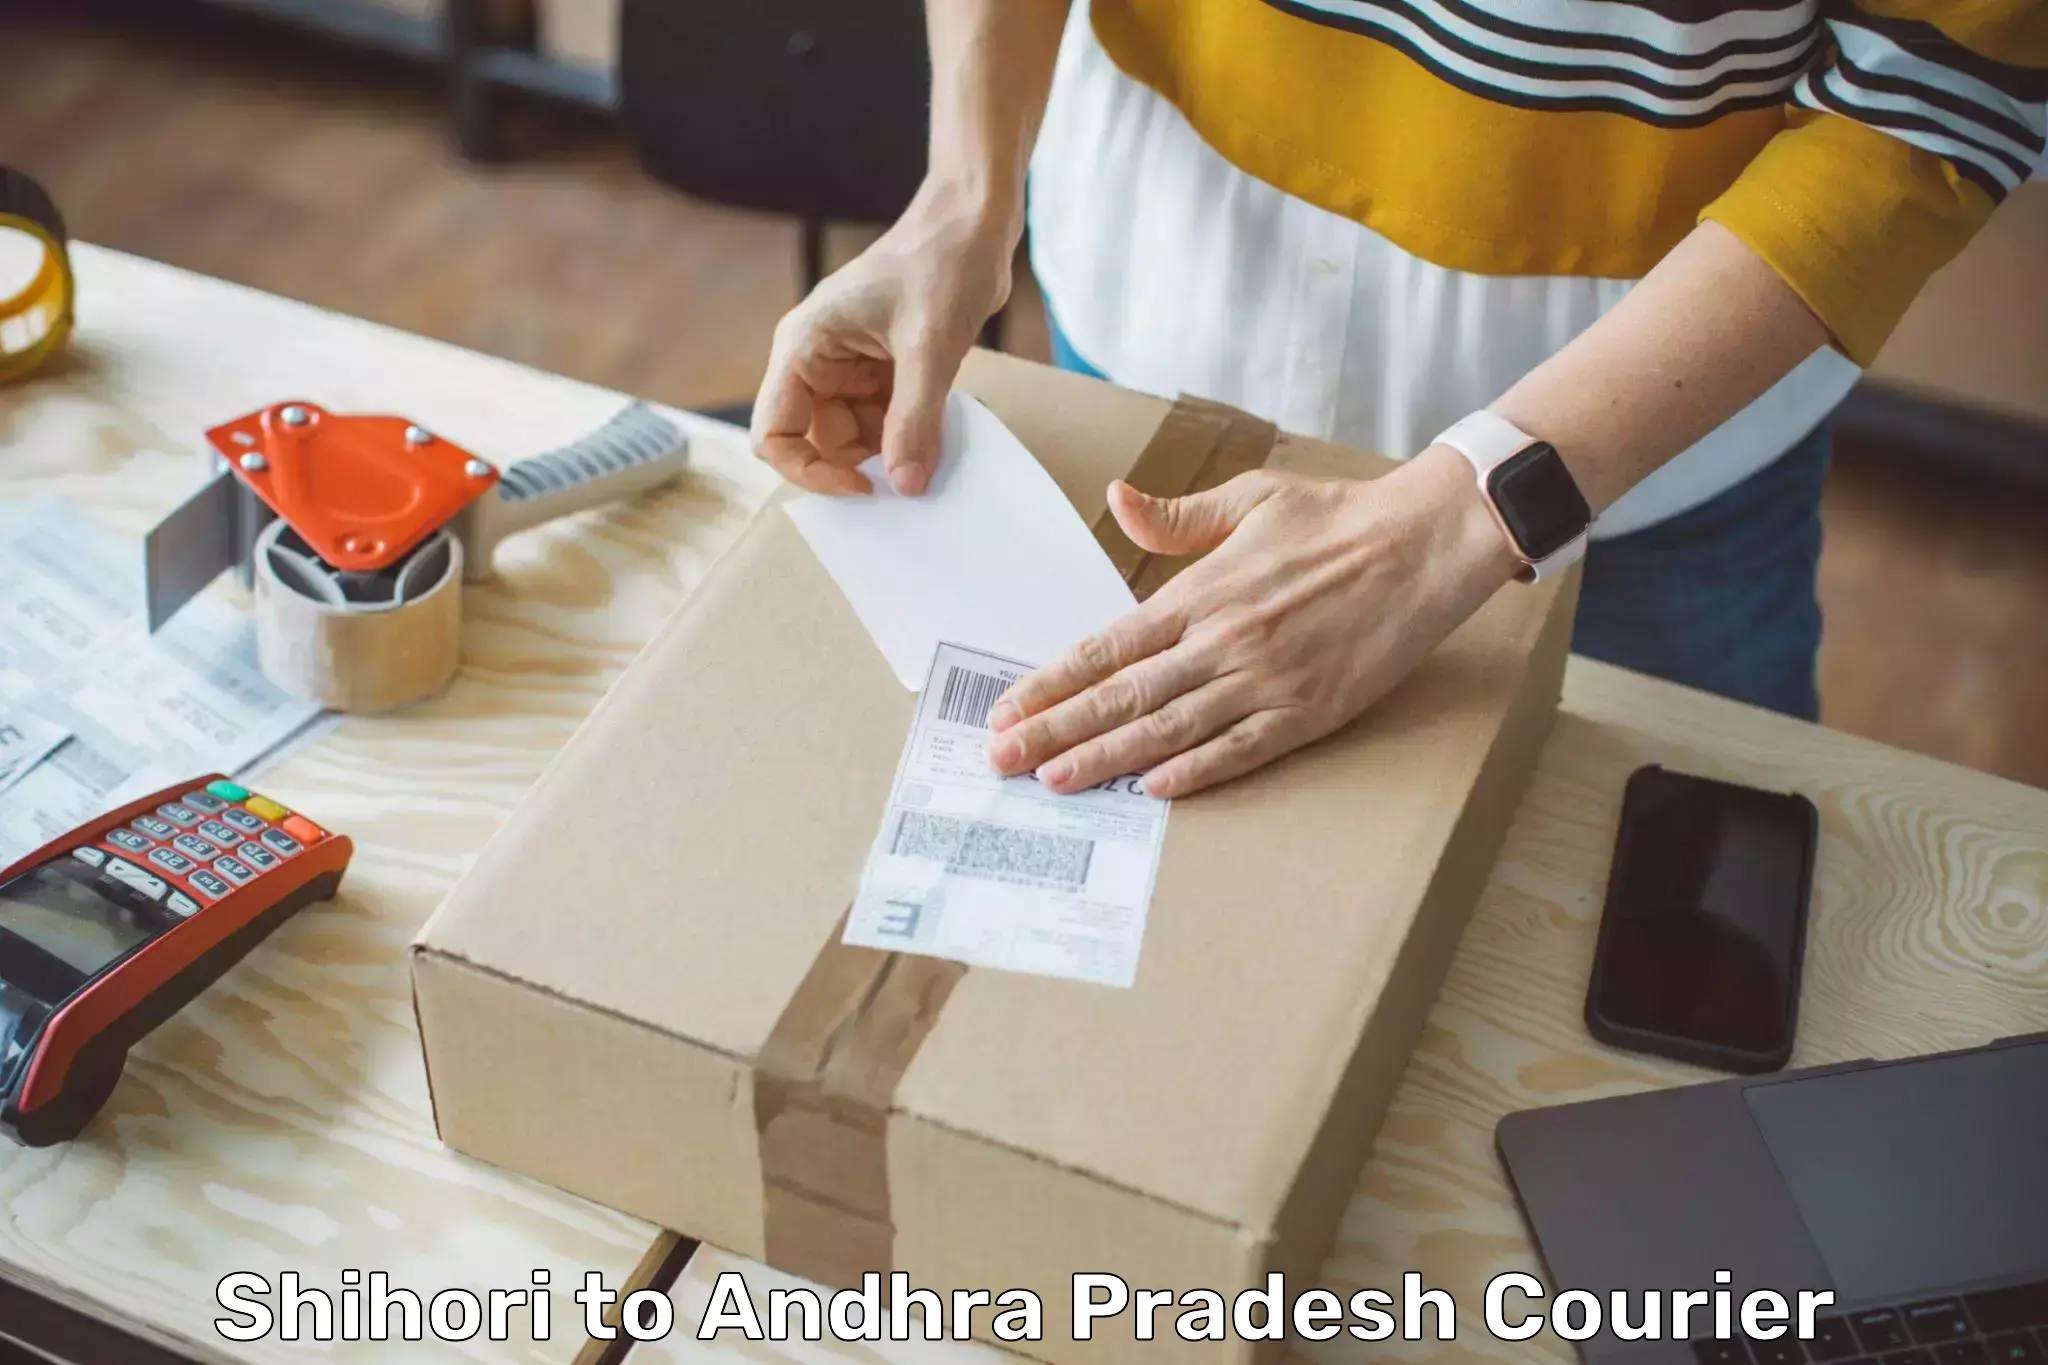 User-friendly delivery service Shihori to Visakhapatnam